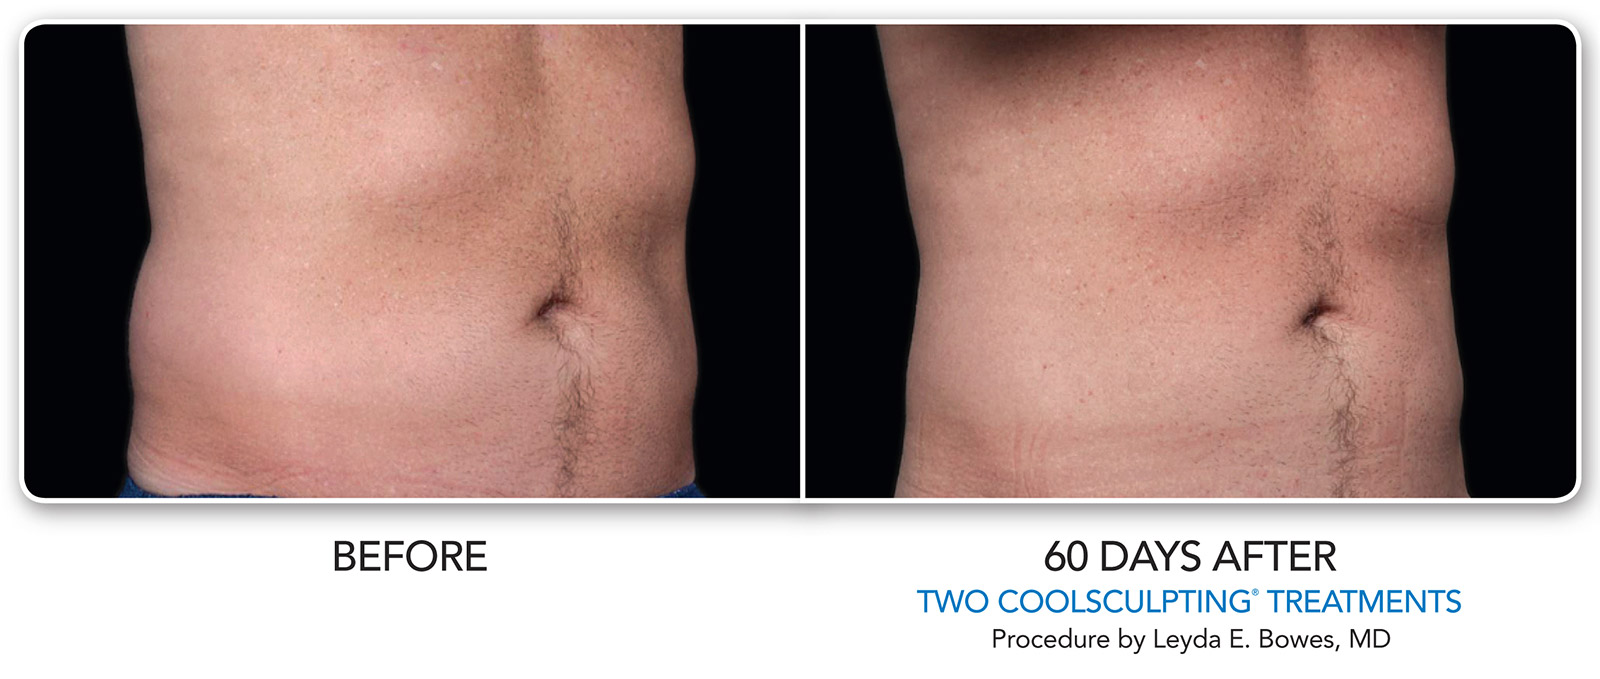 Close-up of man's abdomen before and 60 days after 2 CoolSculpting treatments